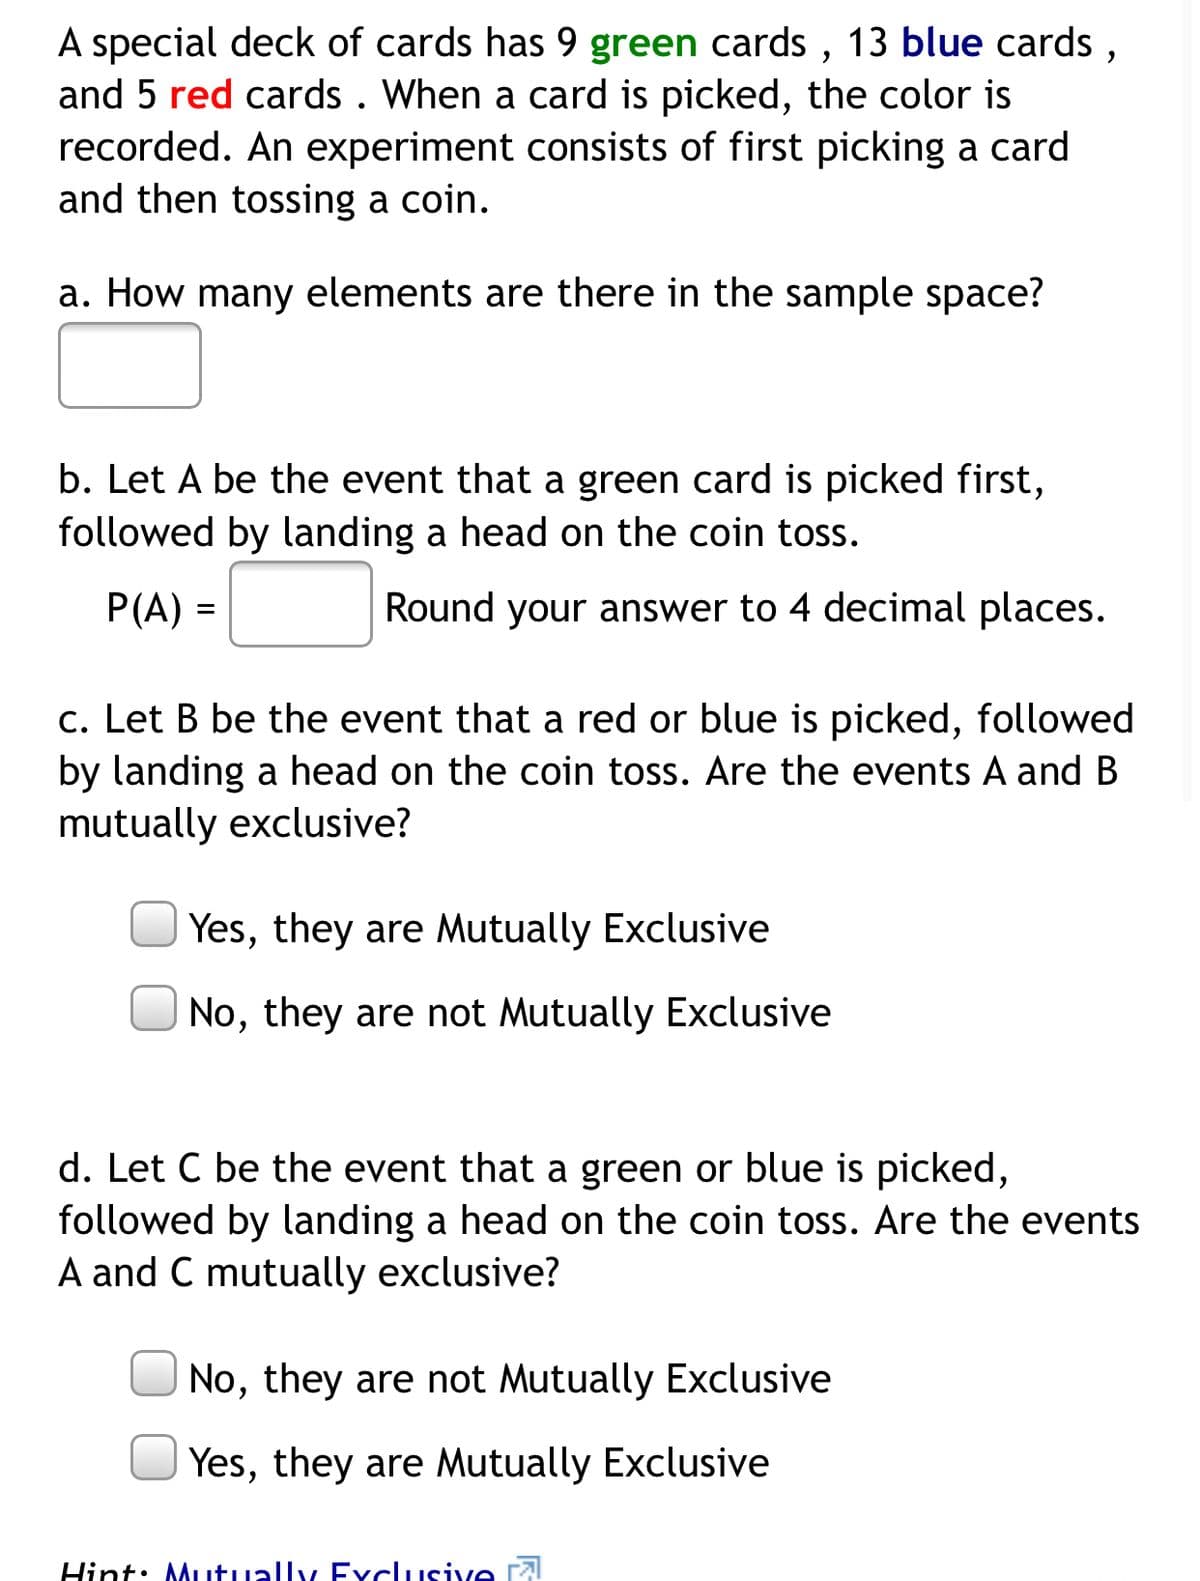 A special deck of cards has 9 green cards , 13 blue cards,
and 5 red cards . When a card is picked, the color is
recorded. An experiment consists of first picking a card
and then tossing a coin.
a. How many elements are there in the sample space?
b. Let A be the event that a green card is picked first,
followed by landing a head on the coin toss.
P(A) =
Round your answer to 4 decimal places.
c. Let B be the event that a red or blue is picked, followed
by landing a head on the coin toss. Are the events A and B
mutually exclusive?
| Yes, they are Mutually Exclusive
No, they are not Mutually Exclusive
d. Let C be the event that a green or blue is picked,
followed by landing a head on the coin toss. Are the events
A and C mutually exclusive?
No, they are not Mutually Exclusive
U Yes, they are Mutually Exclusive
Hint: Mutually Exclusive ral
